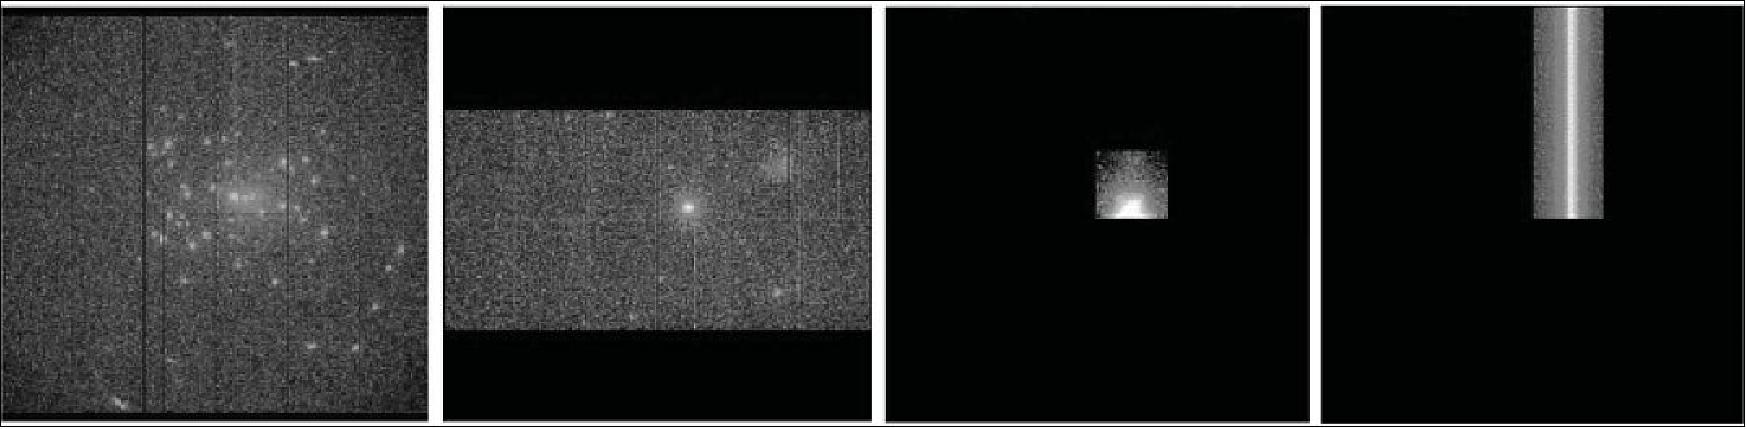 Figure 147: Readout modes of EPIC PN camera. Left to Right: Full window, Large window, Small Window, Timing/Burst (image credit: ESA)